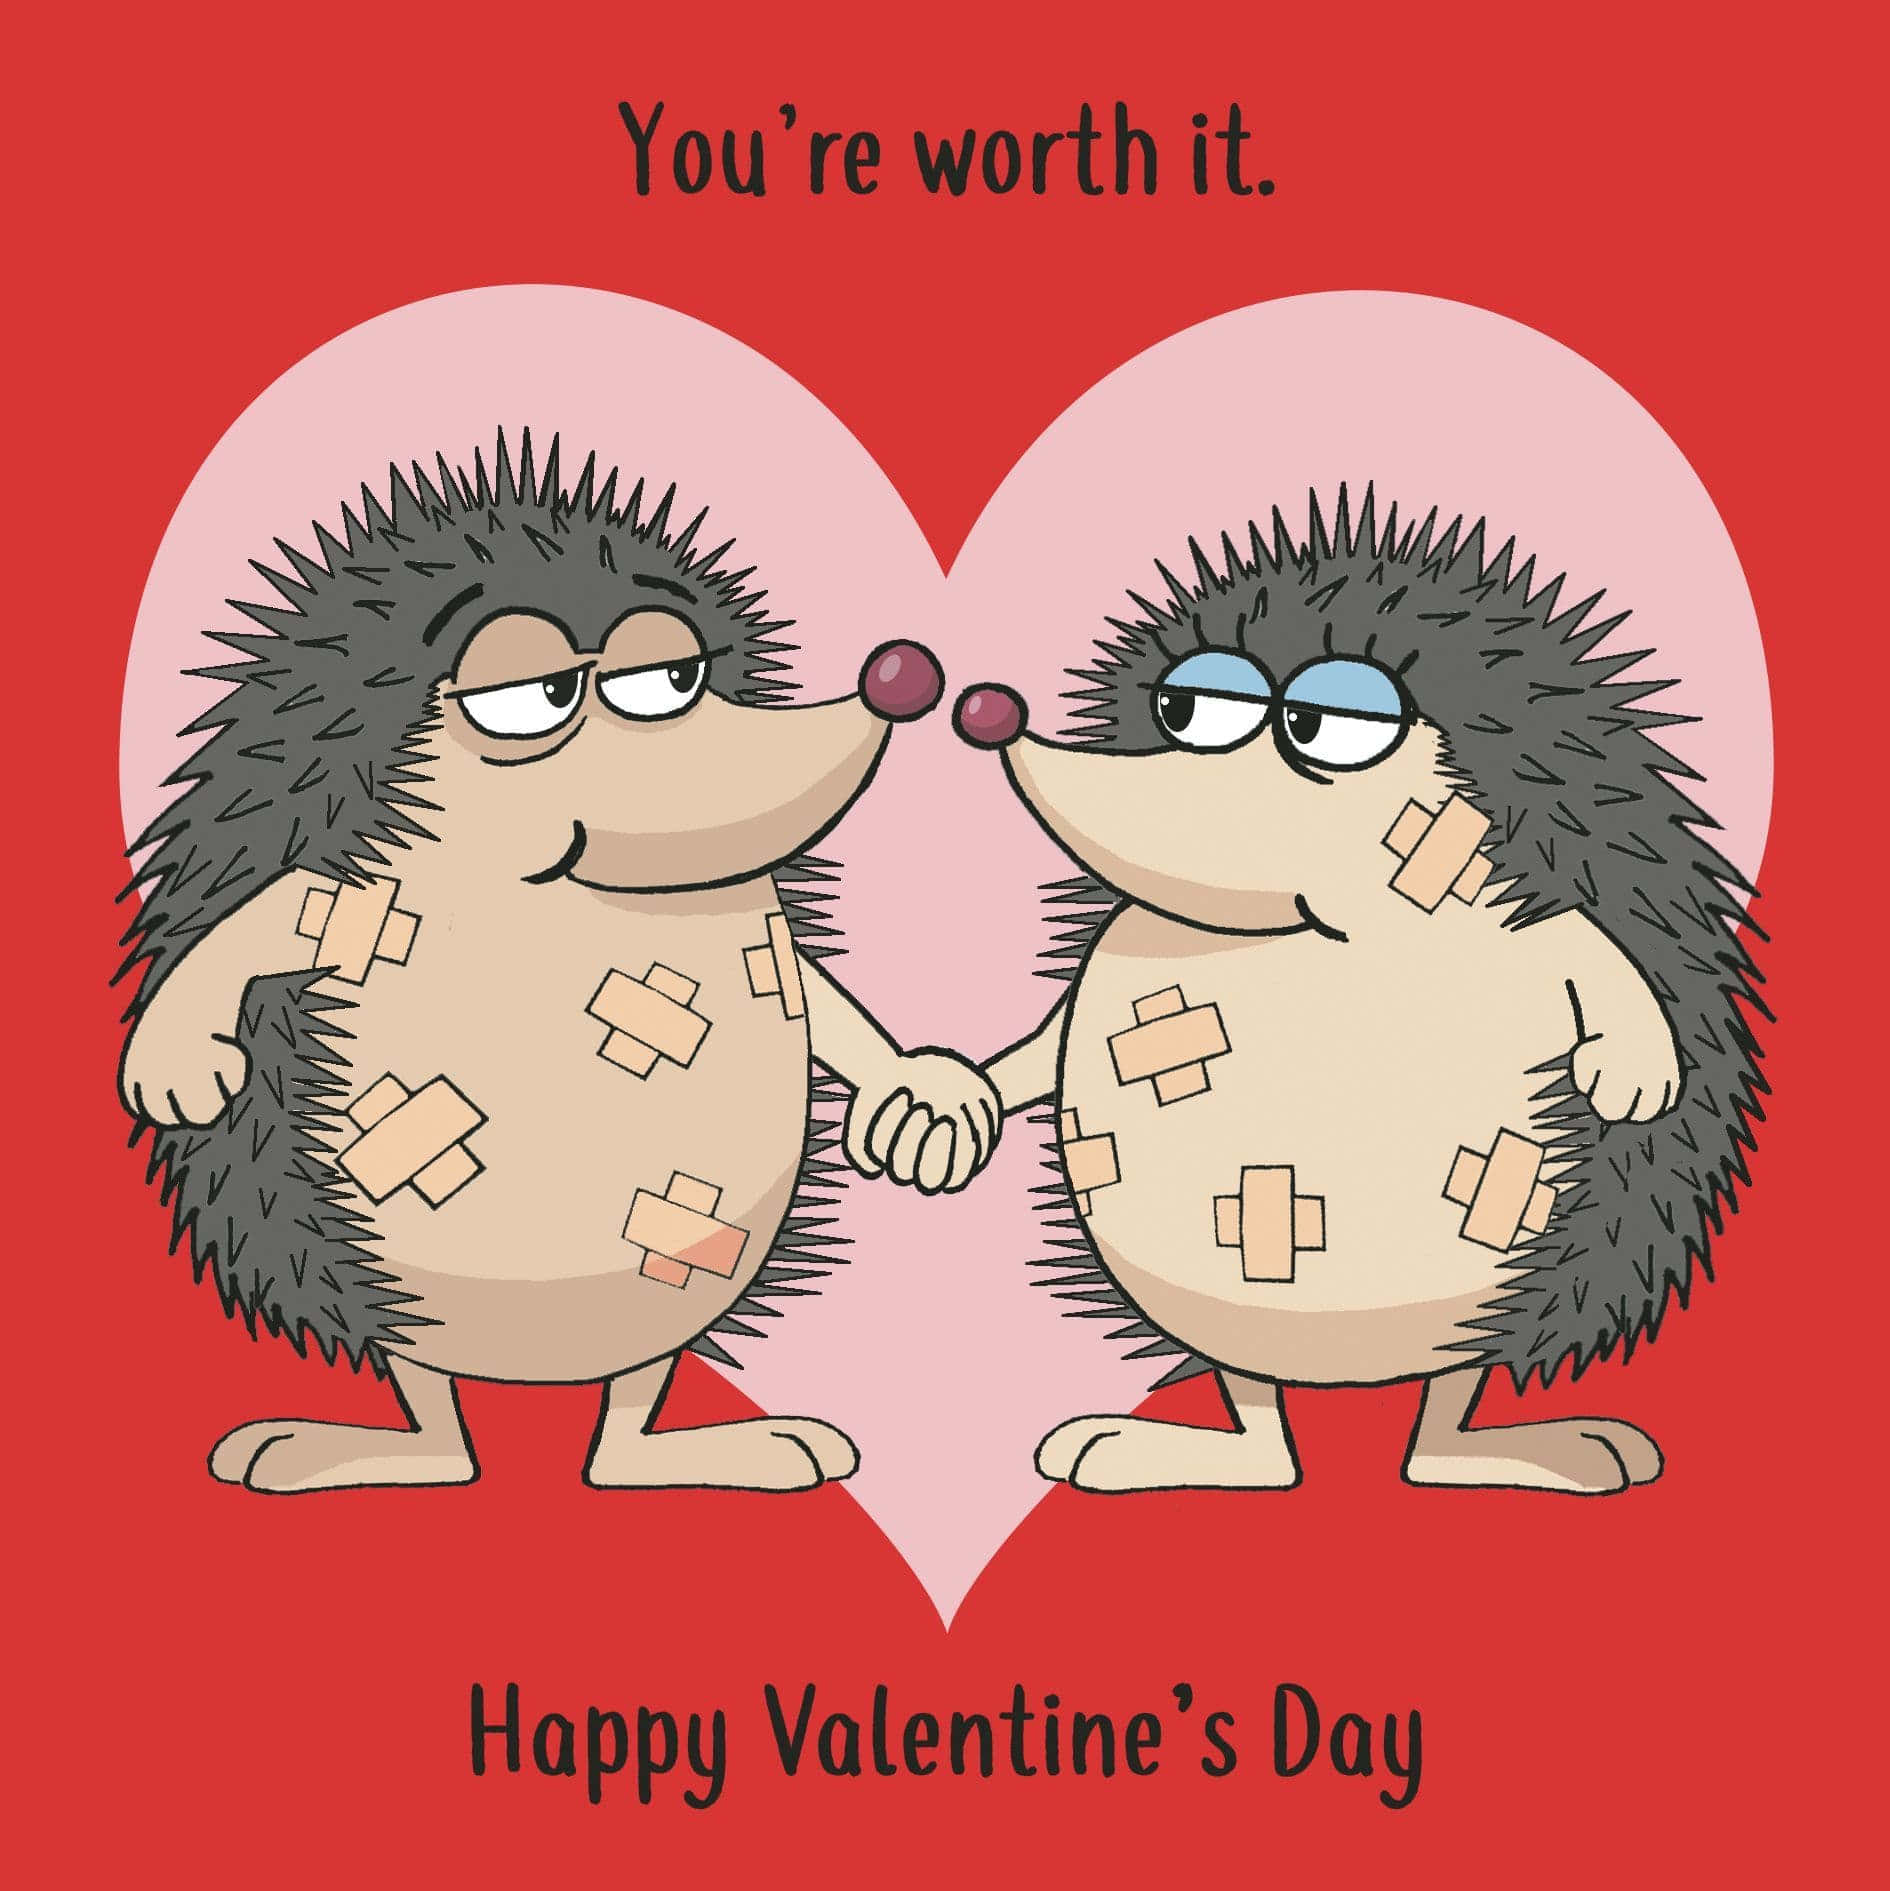 Cute Valentines Cartoon Hedgehog Holding Hands Picture